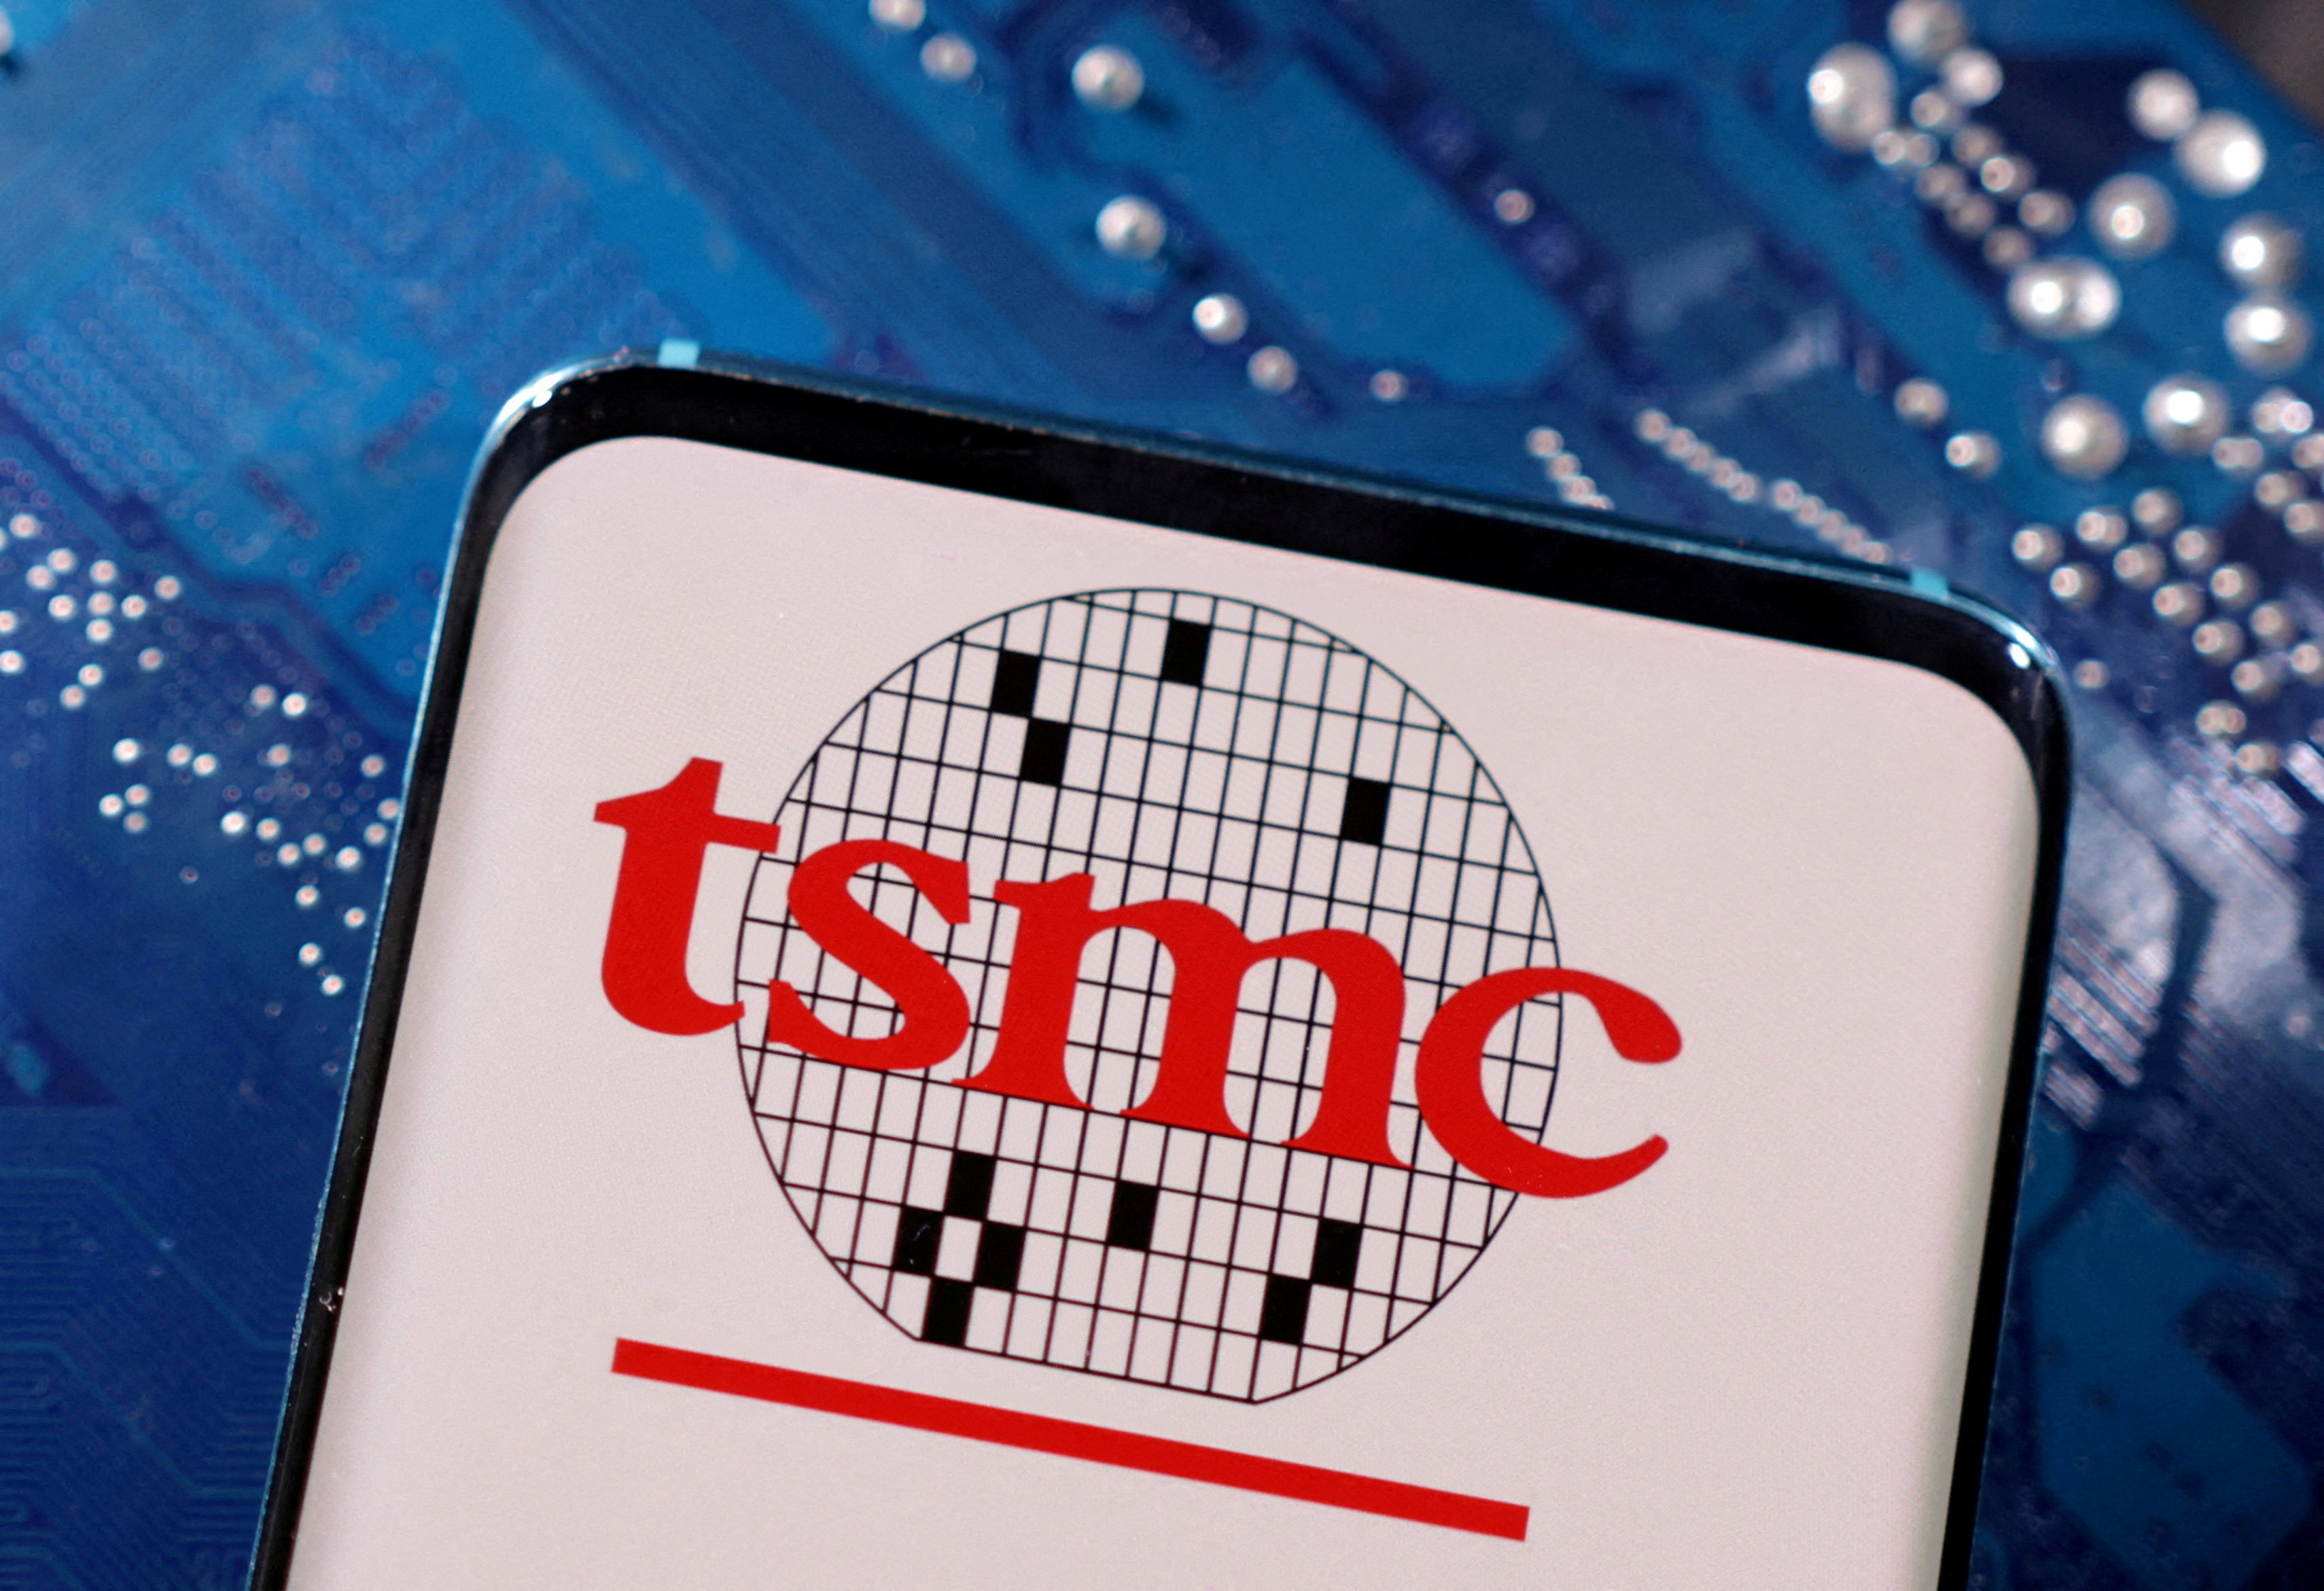 Most analysts are bullish on TSMC despite current geopolitical and industry challenges. Photo: Reuters